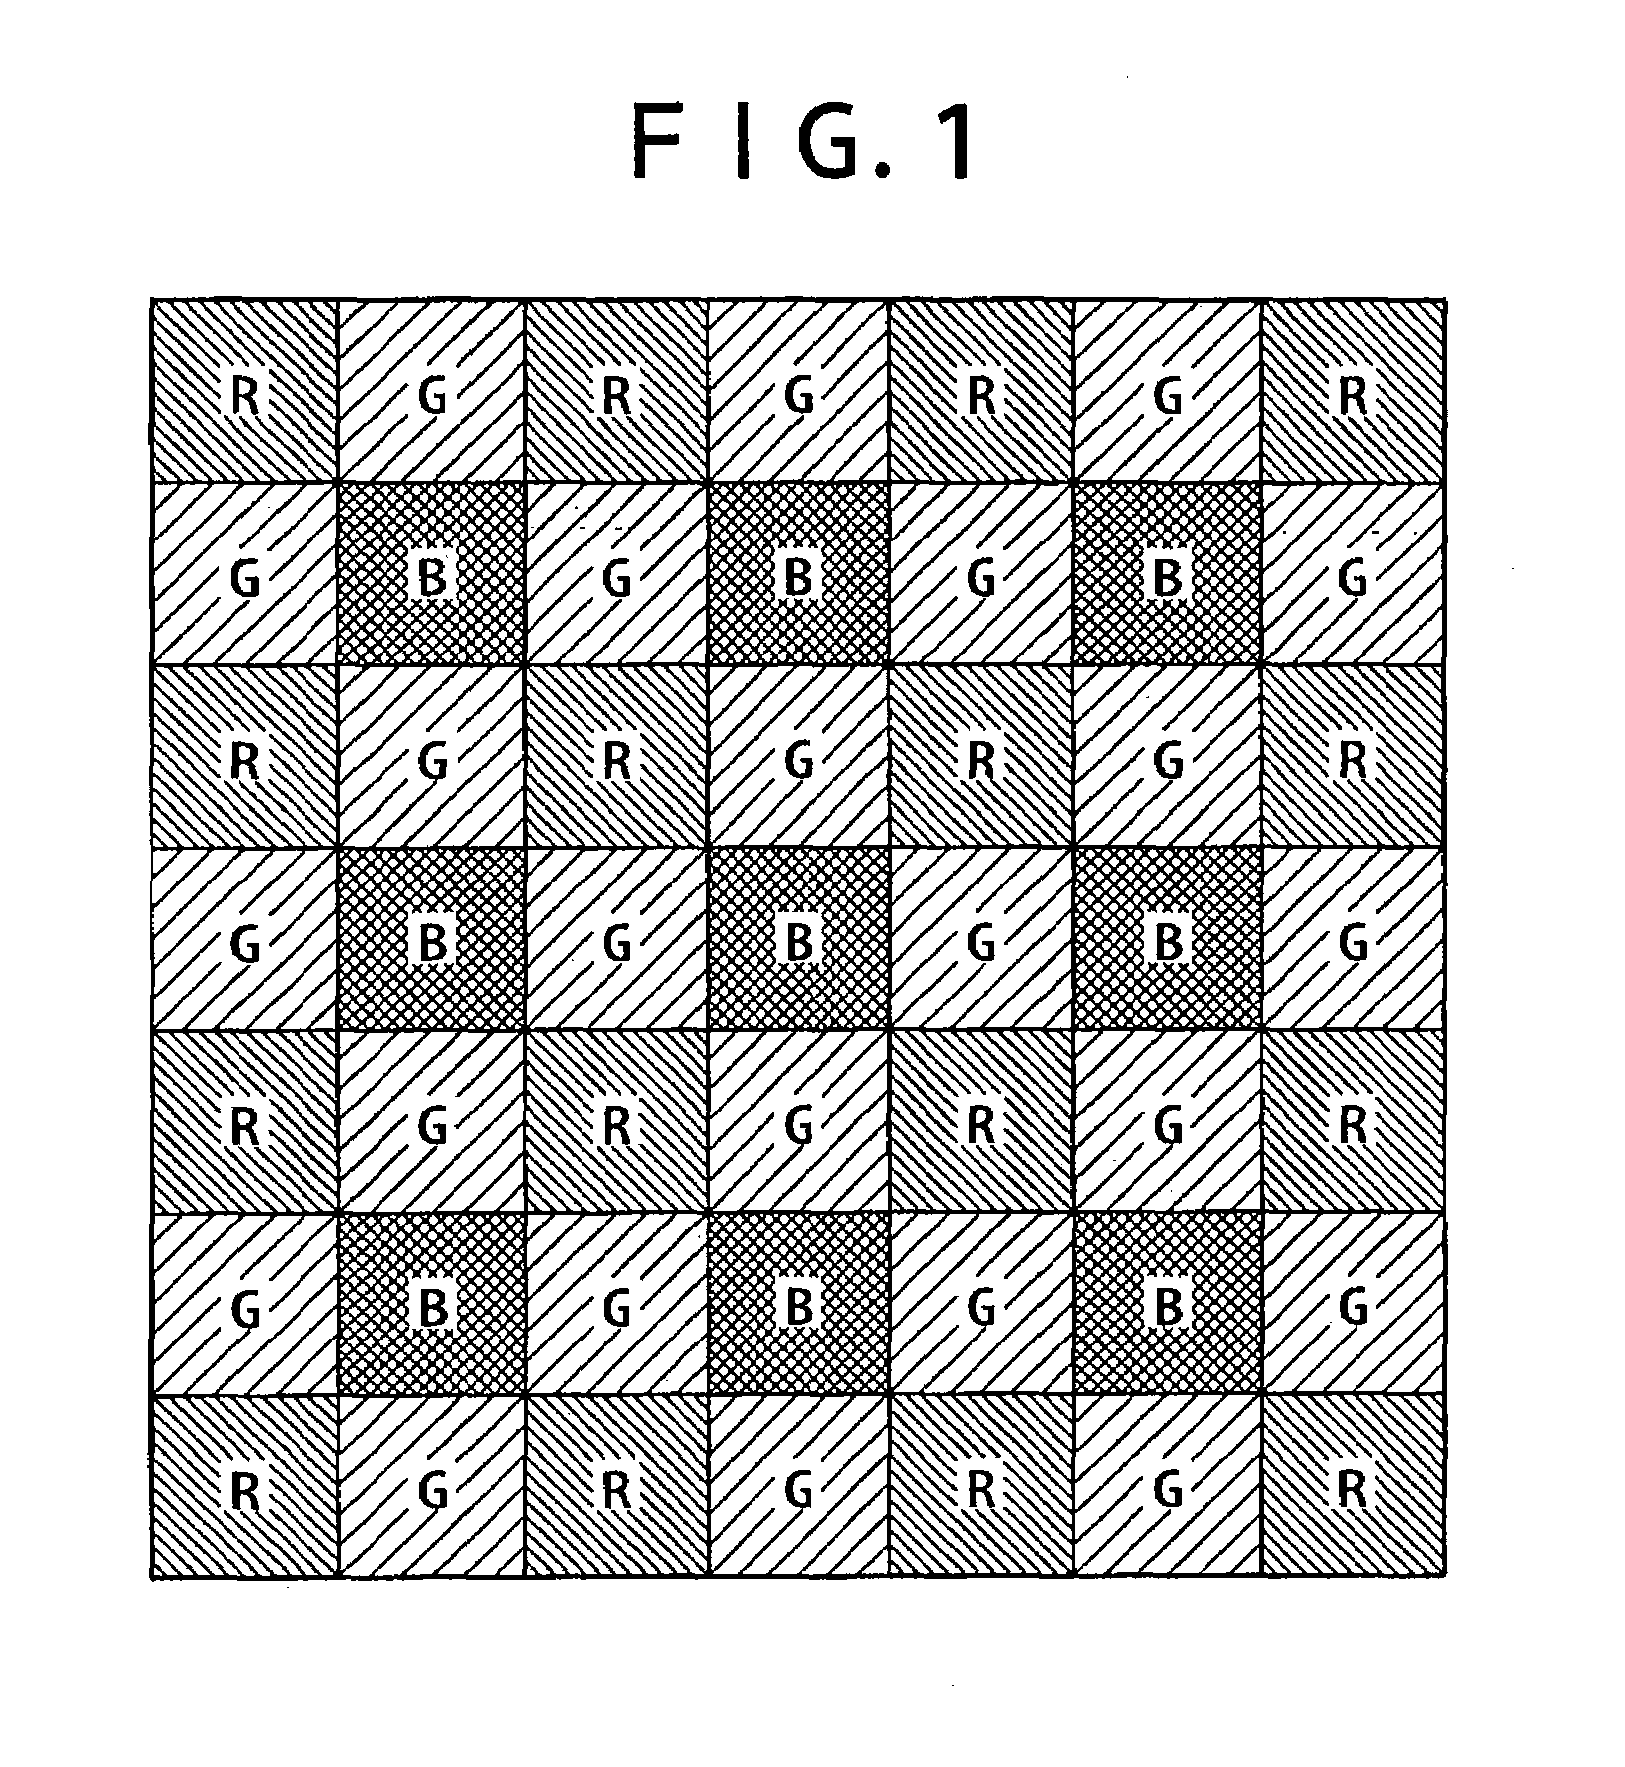 Image processing apparatus and image processing method, and program